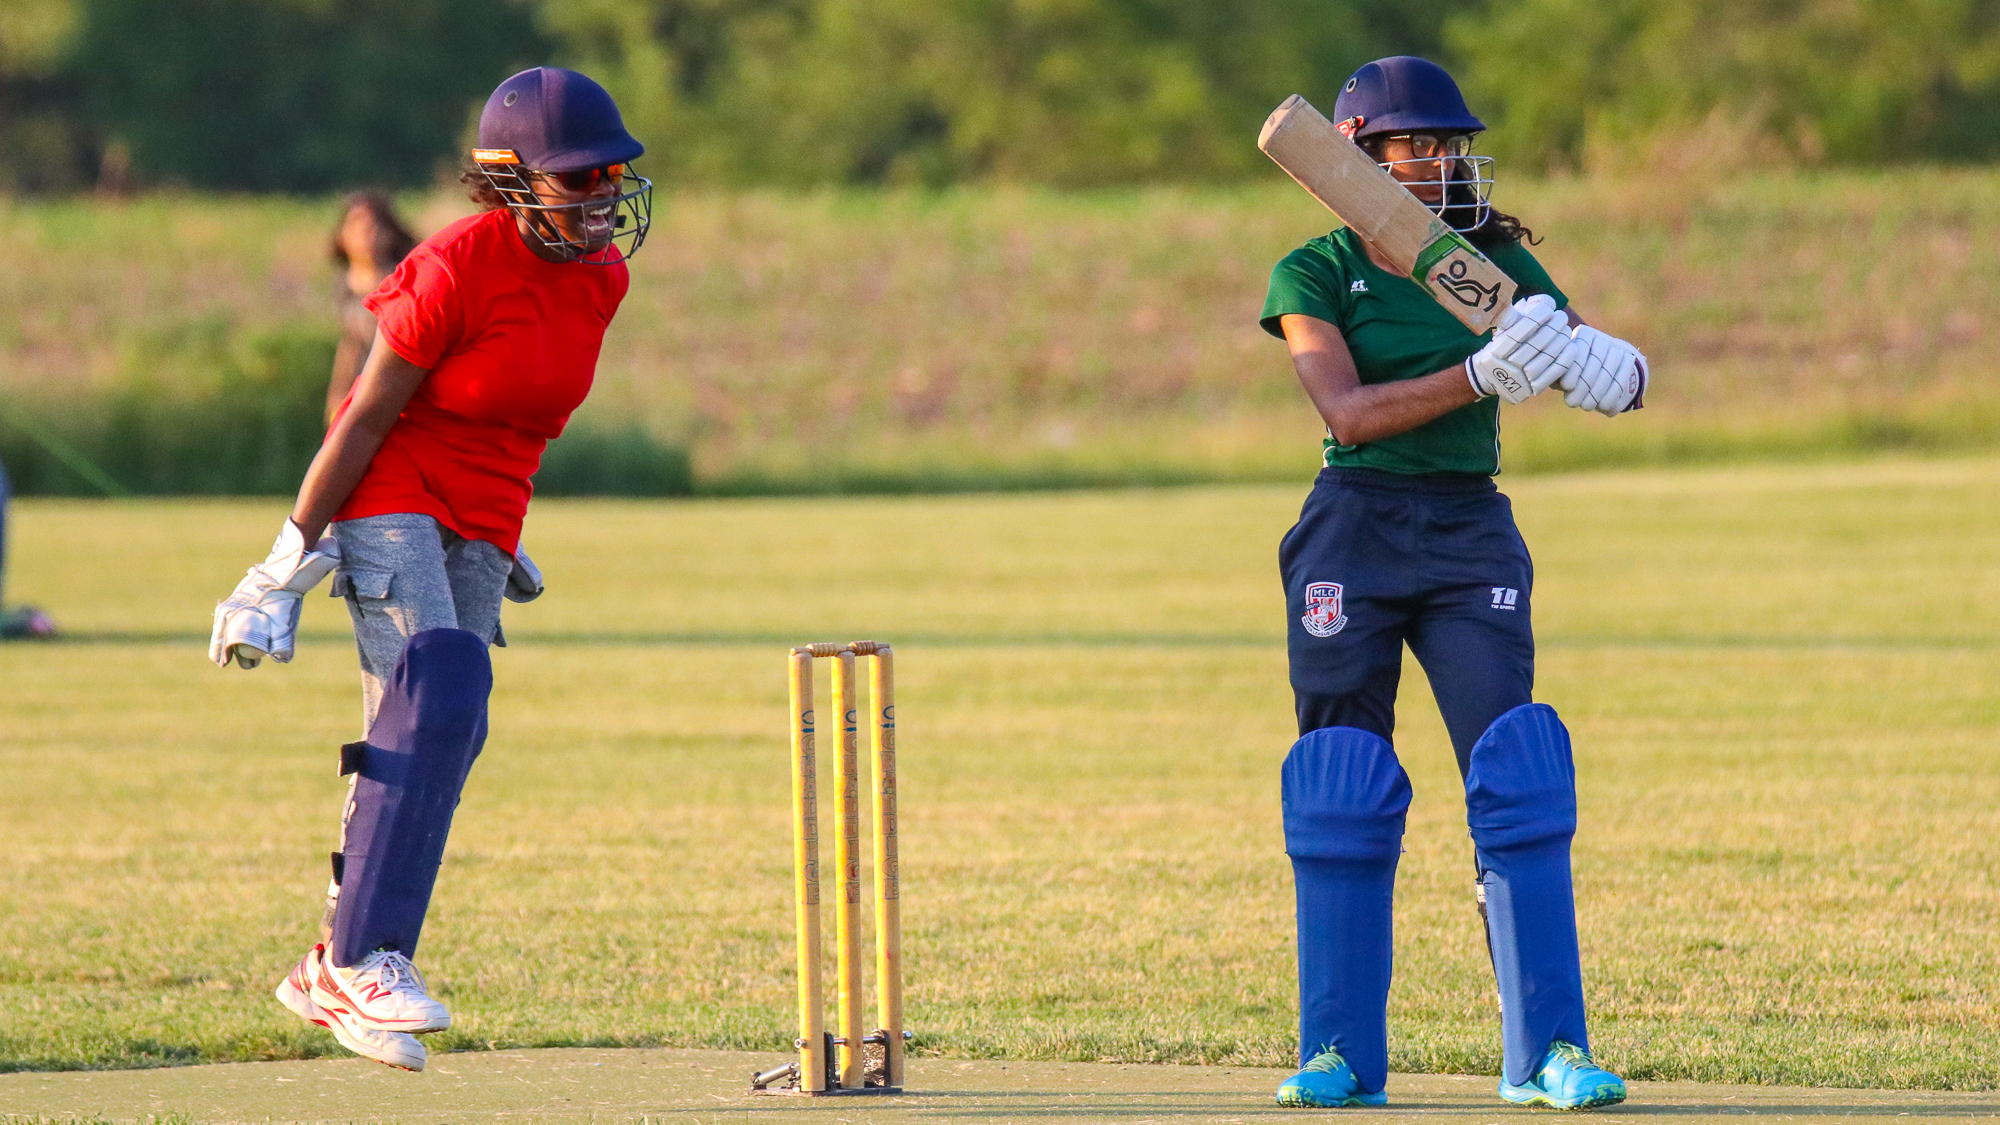 Stage is Set for Start of USA Cricket Women’s Regionals